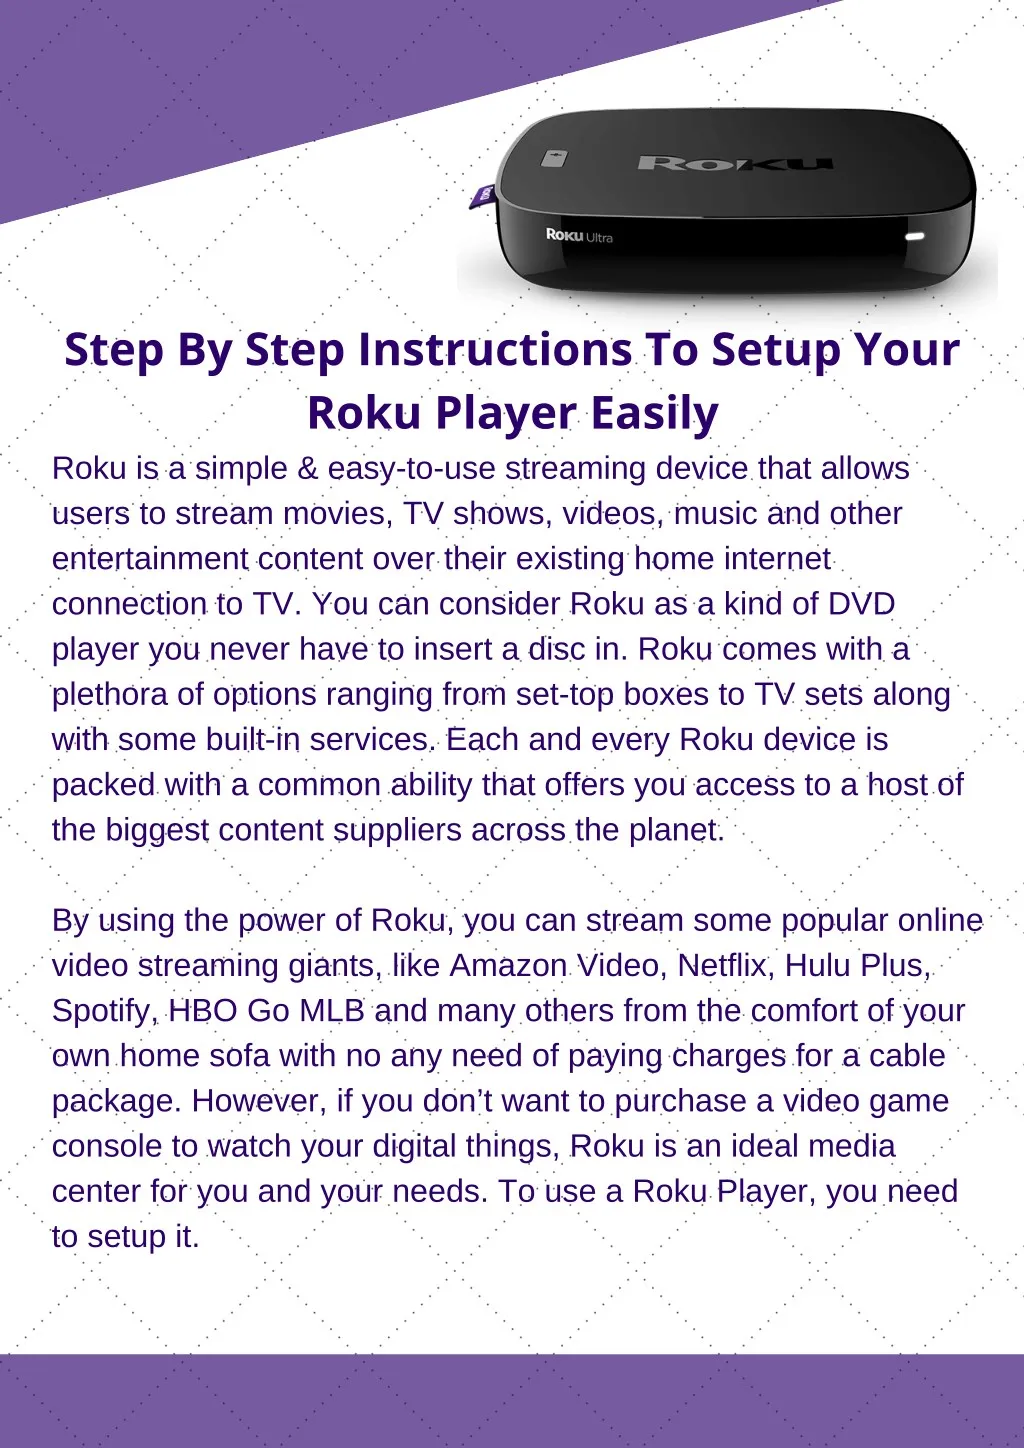 step by step instructions to setup your roku